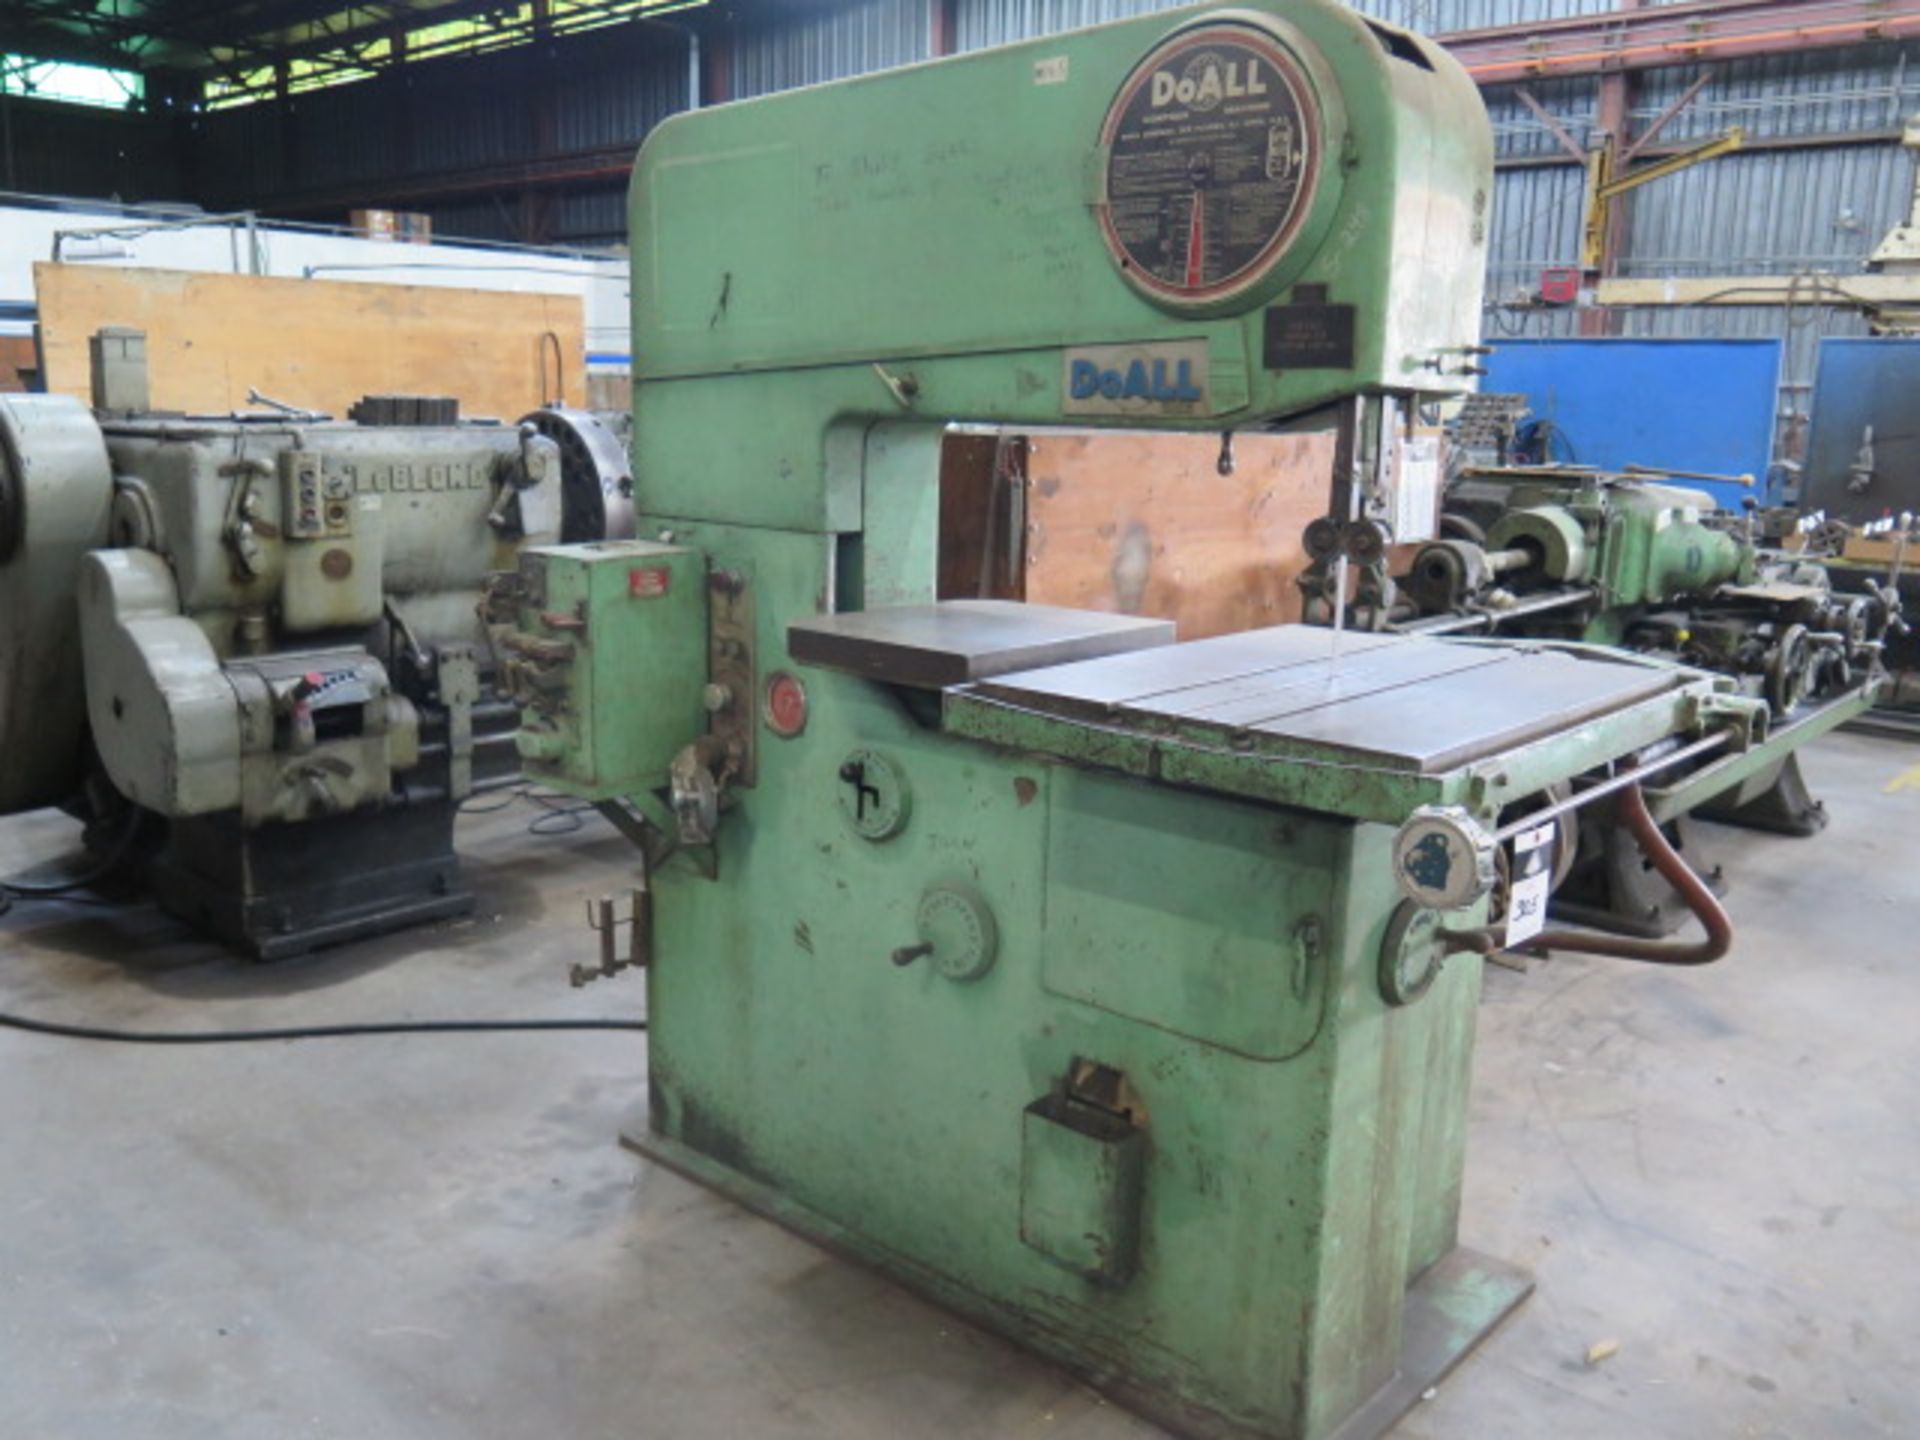 DoAll 36-3 36” Vertical Band Saw s/n 53-56296 w/ Blade Welder, 6000 Dial FPM, SOLD AS IS